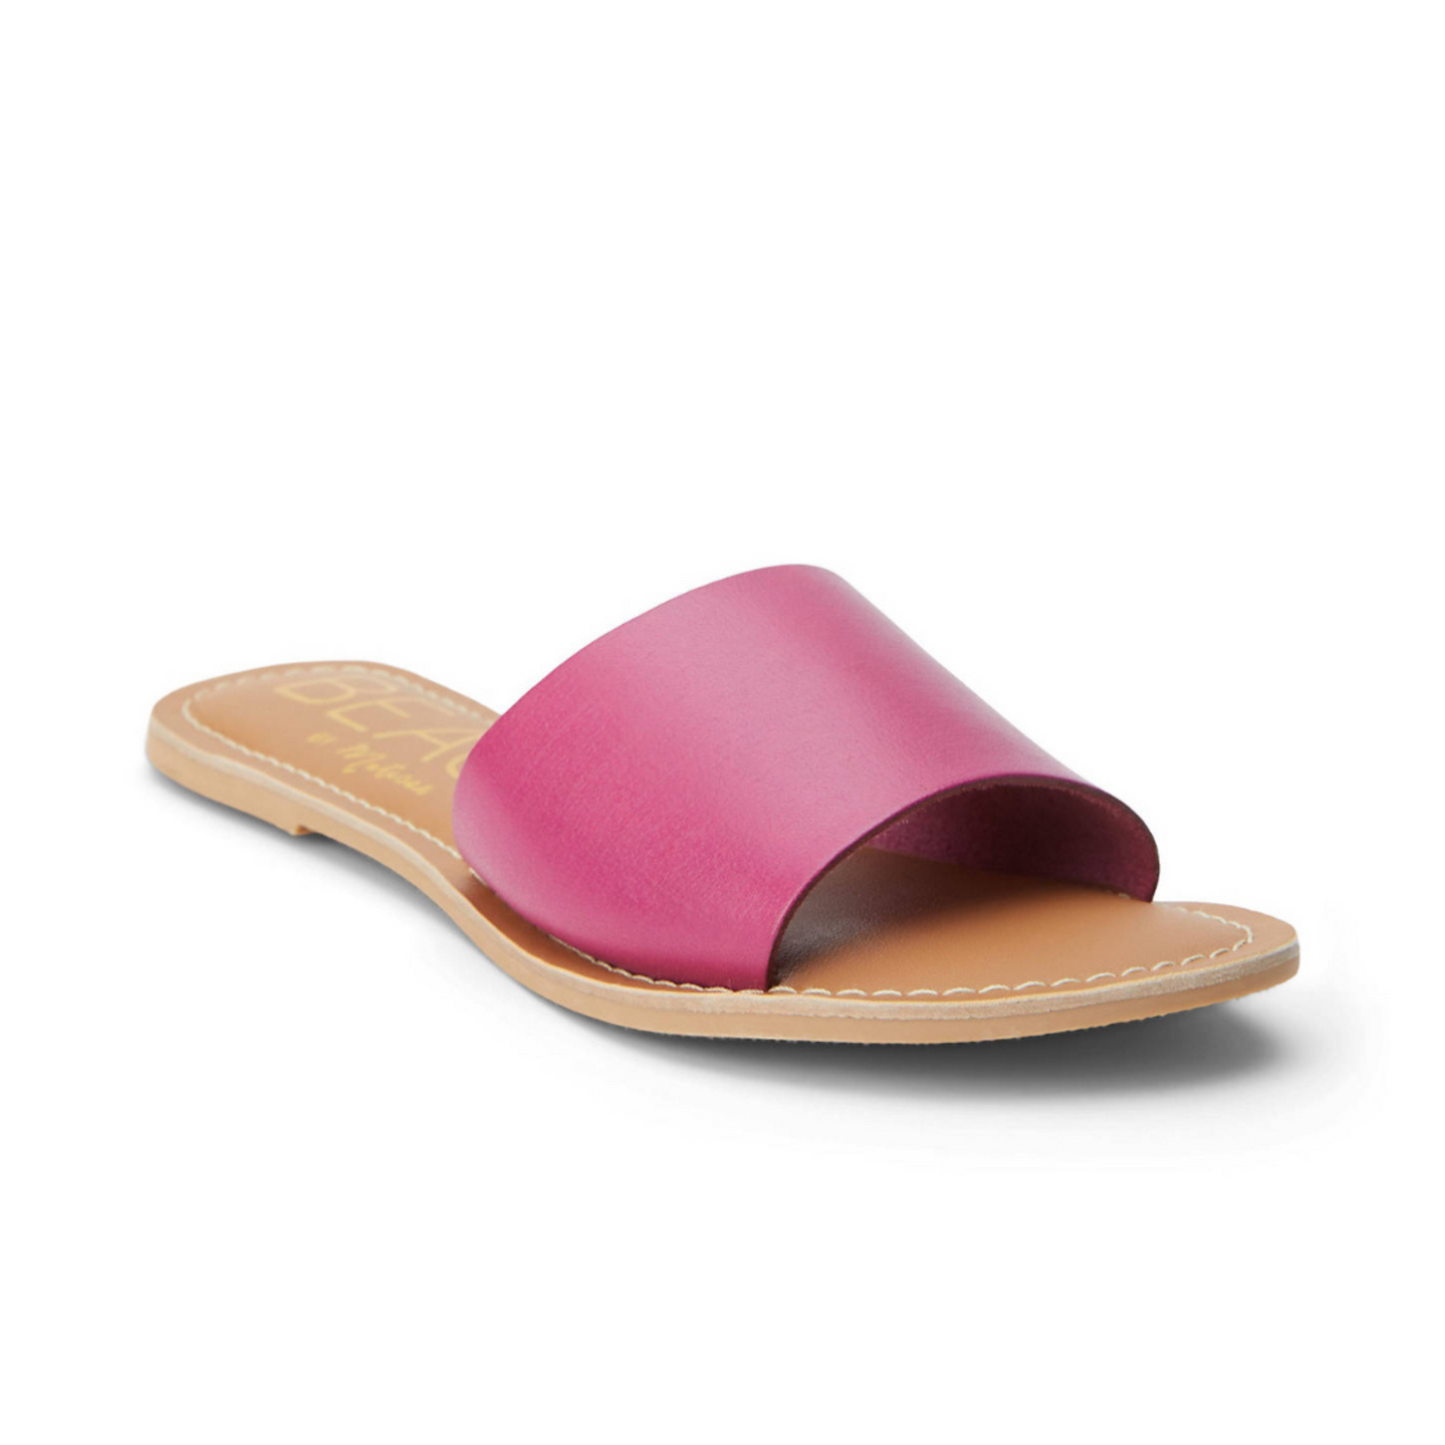 Introducing Cabana sandals from Matisse, a chic summer staple. Offered in both pink and white, these slip-on flats feature a stylish design, perfect for outdoor activities and beach days. Enjoy effortless comfort while adding a fashionable touch.